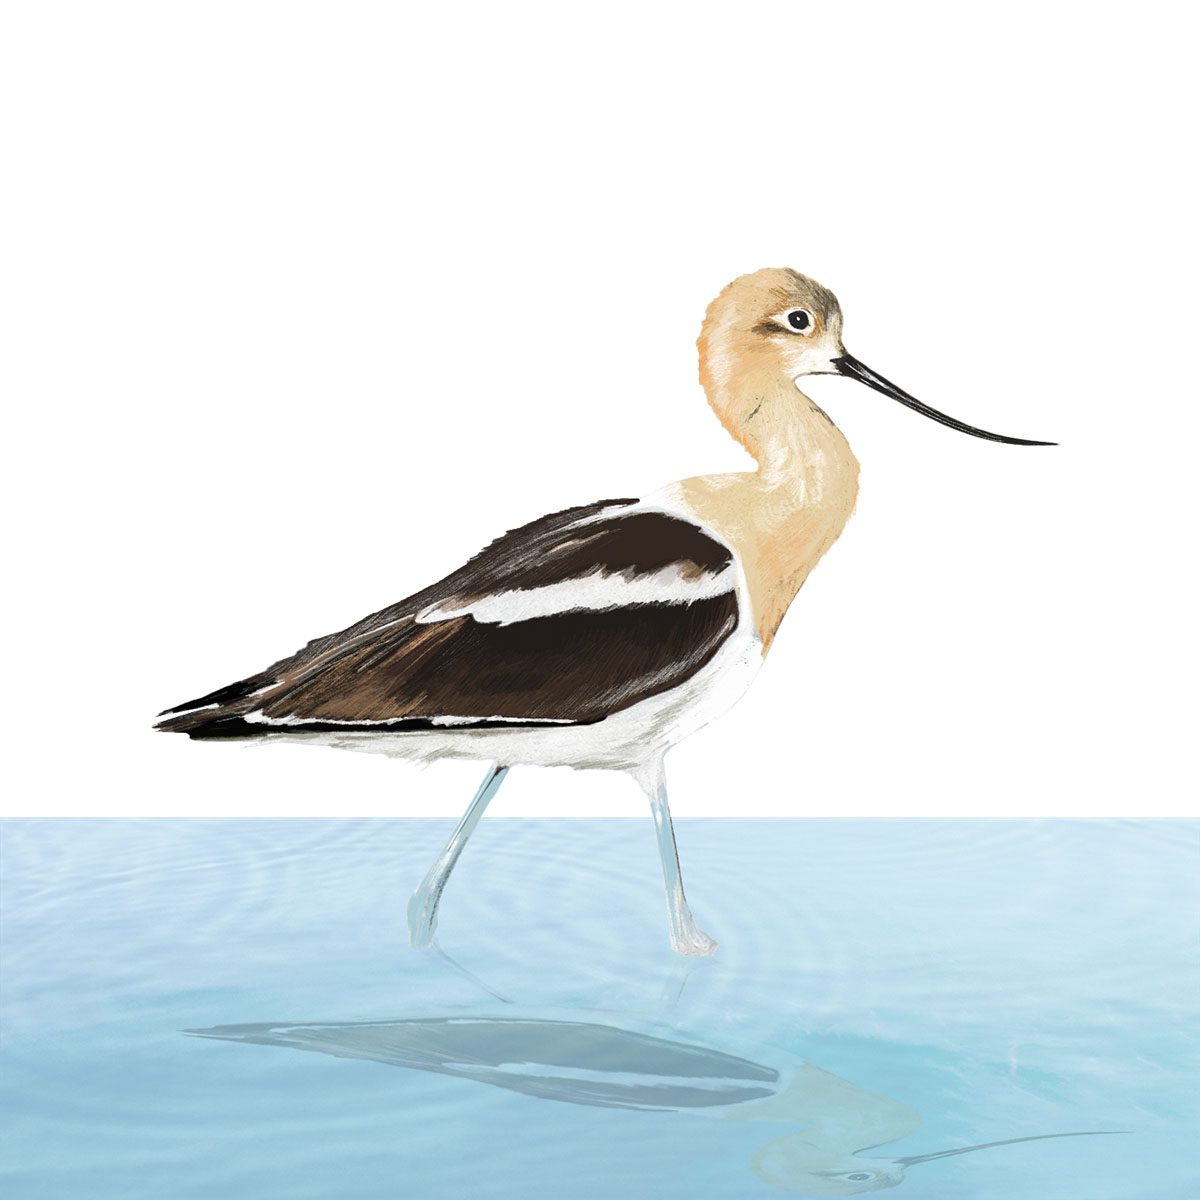 An illustration of a tan and black bird with a long bill standing in shallow blue water